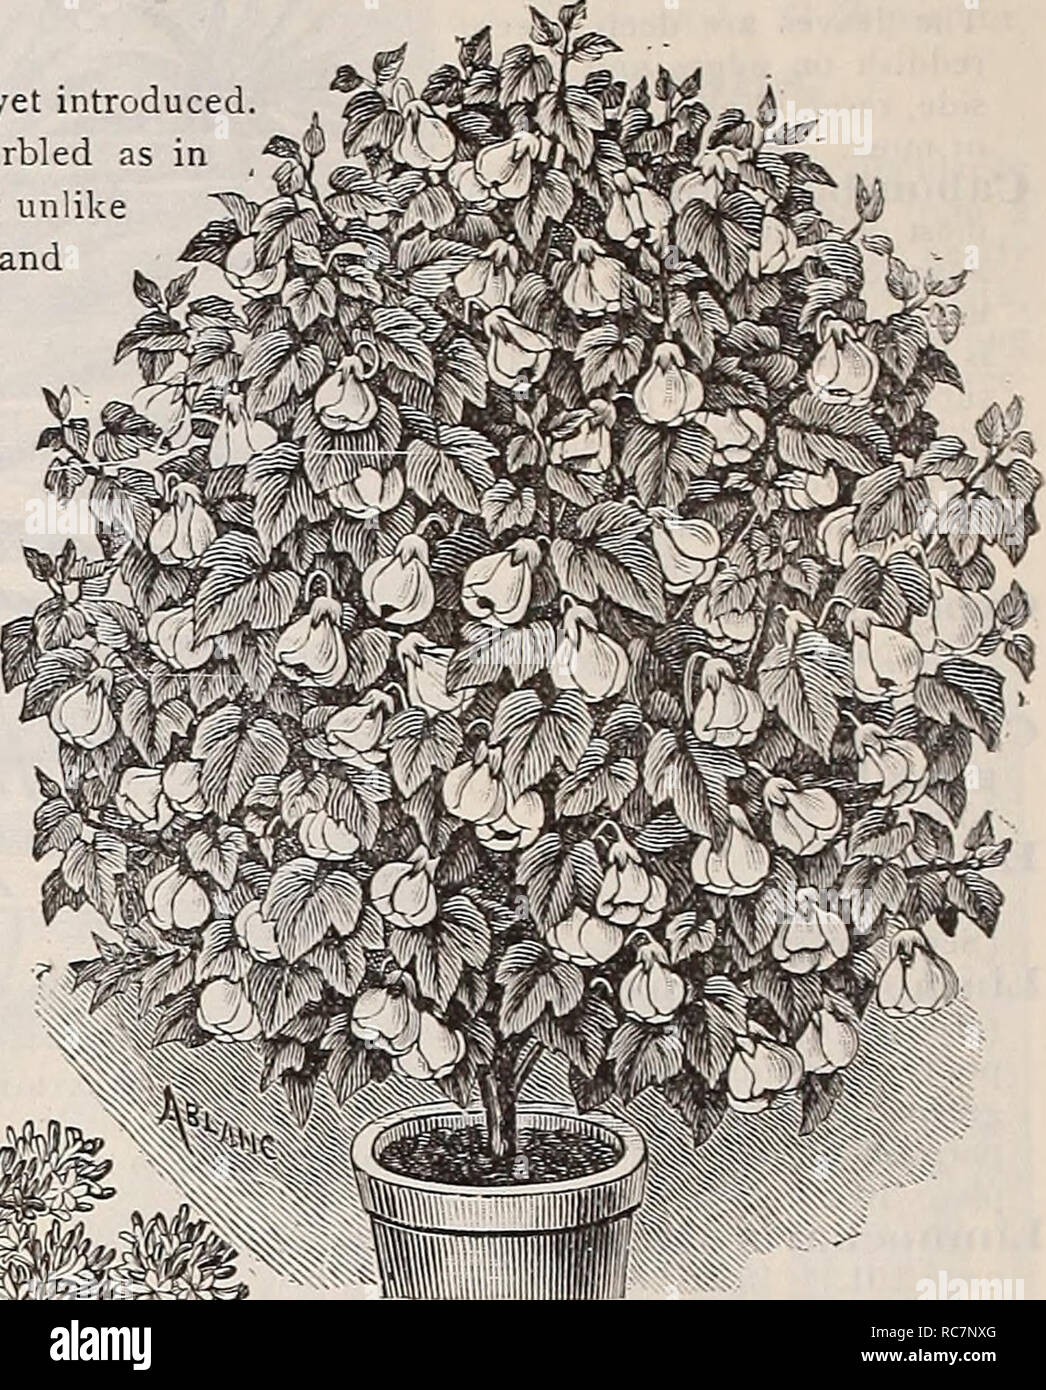 . Dreer's garden calendar : 1898. Seeds Catalogs; Nursery stock Catalogs; Gardening Catalogs; Flowers Seeds Catalogs; Vegetables Seeds Catalogs. Agapanthus. Abutilon Golden Fleece. ACHIMENES. Tropical plants for summer blooming; the scaly tubers must be preserved entirely dry during the winter. In early spring pot in peat, sand and a little light soil. They delight in heat, moist- ure and shade while growing, hut in a cooler temperature when in bloom. Do not water the foliage. Excellent for baskets. Six choice varieties named. 15 cts. each, Â§1.50 per doz. Alocasia Sandbriana. AGAPAIVTHUS UMBE Stock Photo